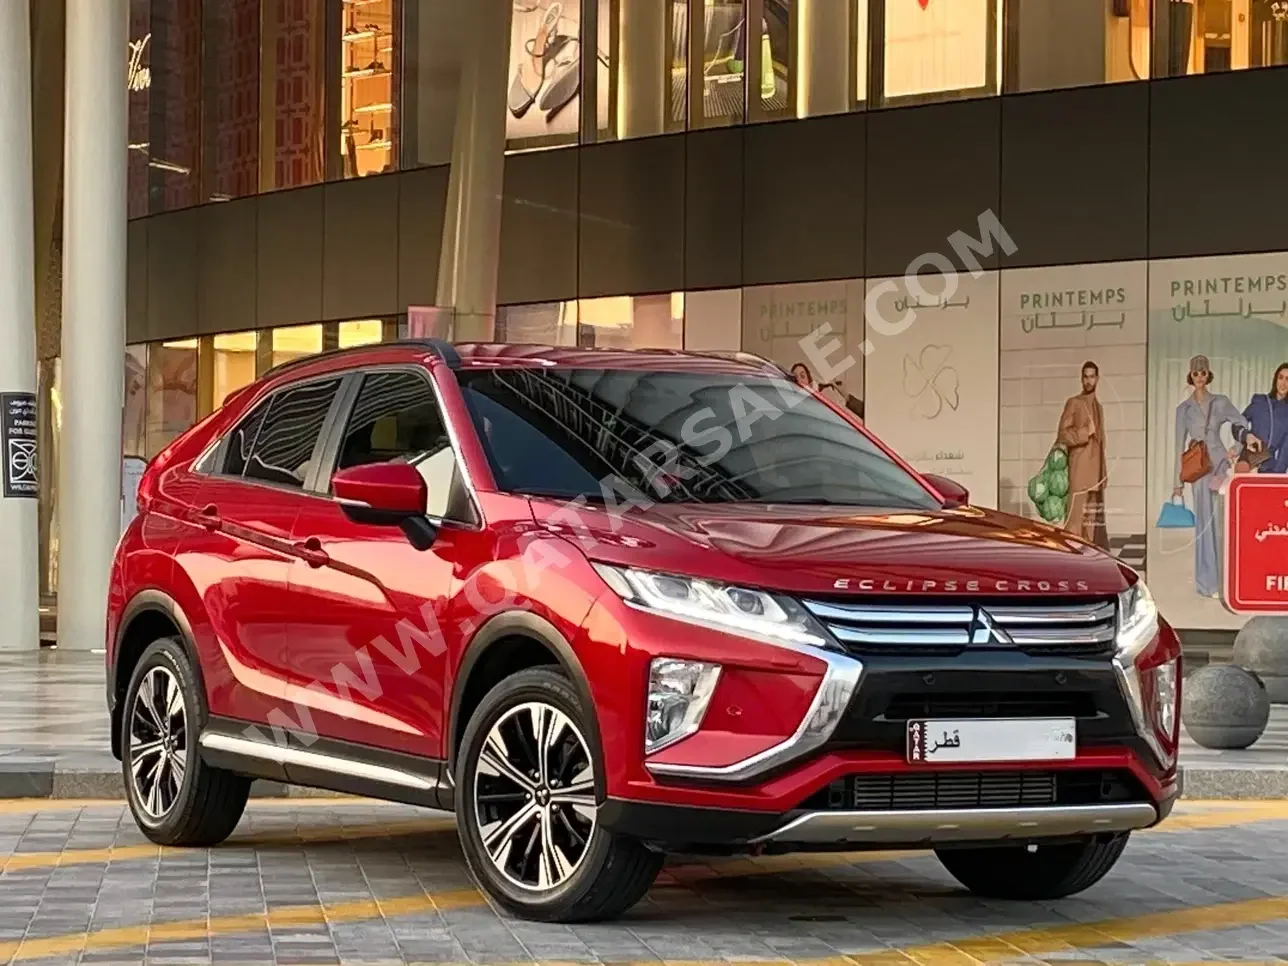 Mitsubishi  Eclipse  Cross Highline  2020  Automatic  56,000 Km  4 Cylinder  All Wheel Drive (AWD)  SUV  Red  With Warranty